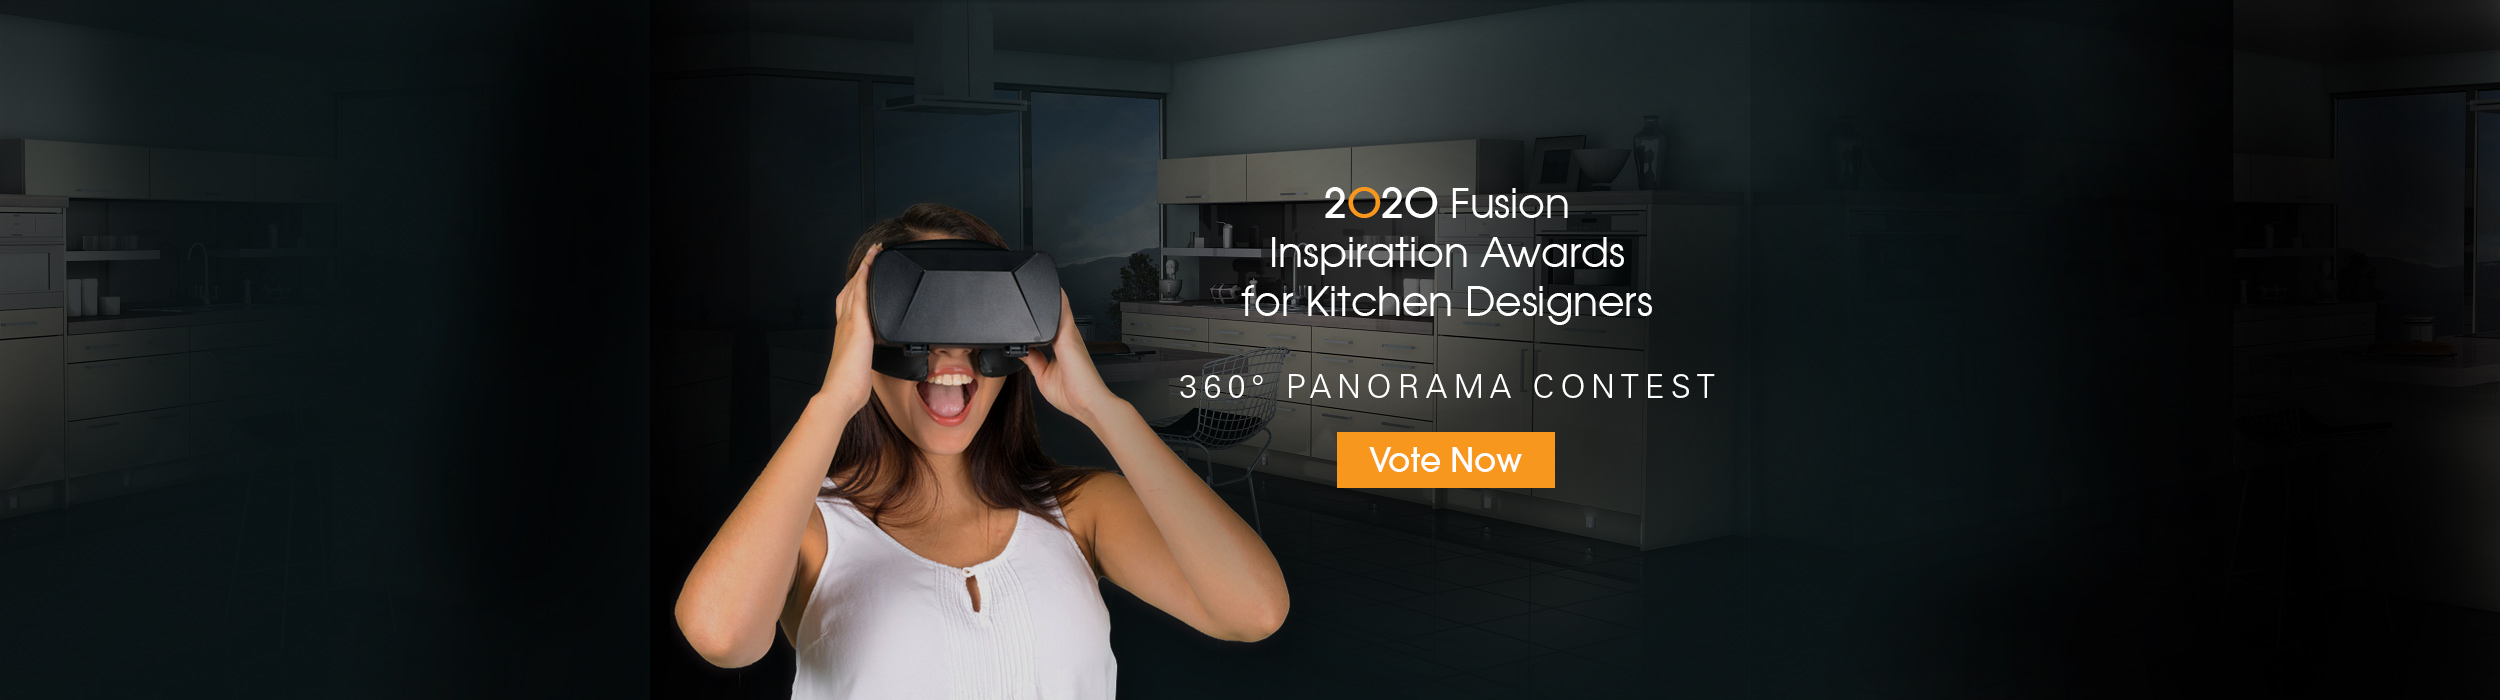 2020 Inspiration Awards 2016 for 360 Panorama Contest